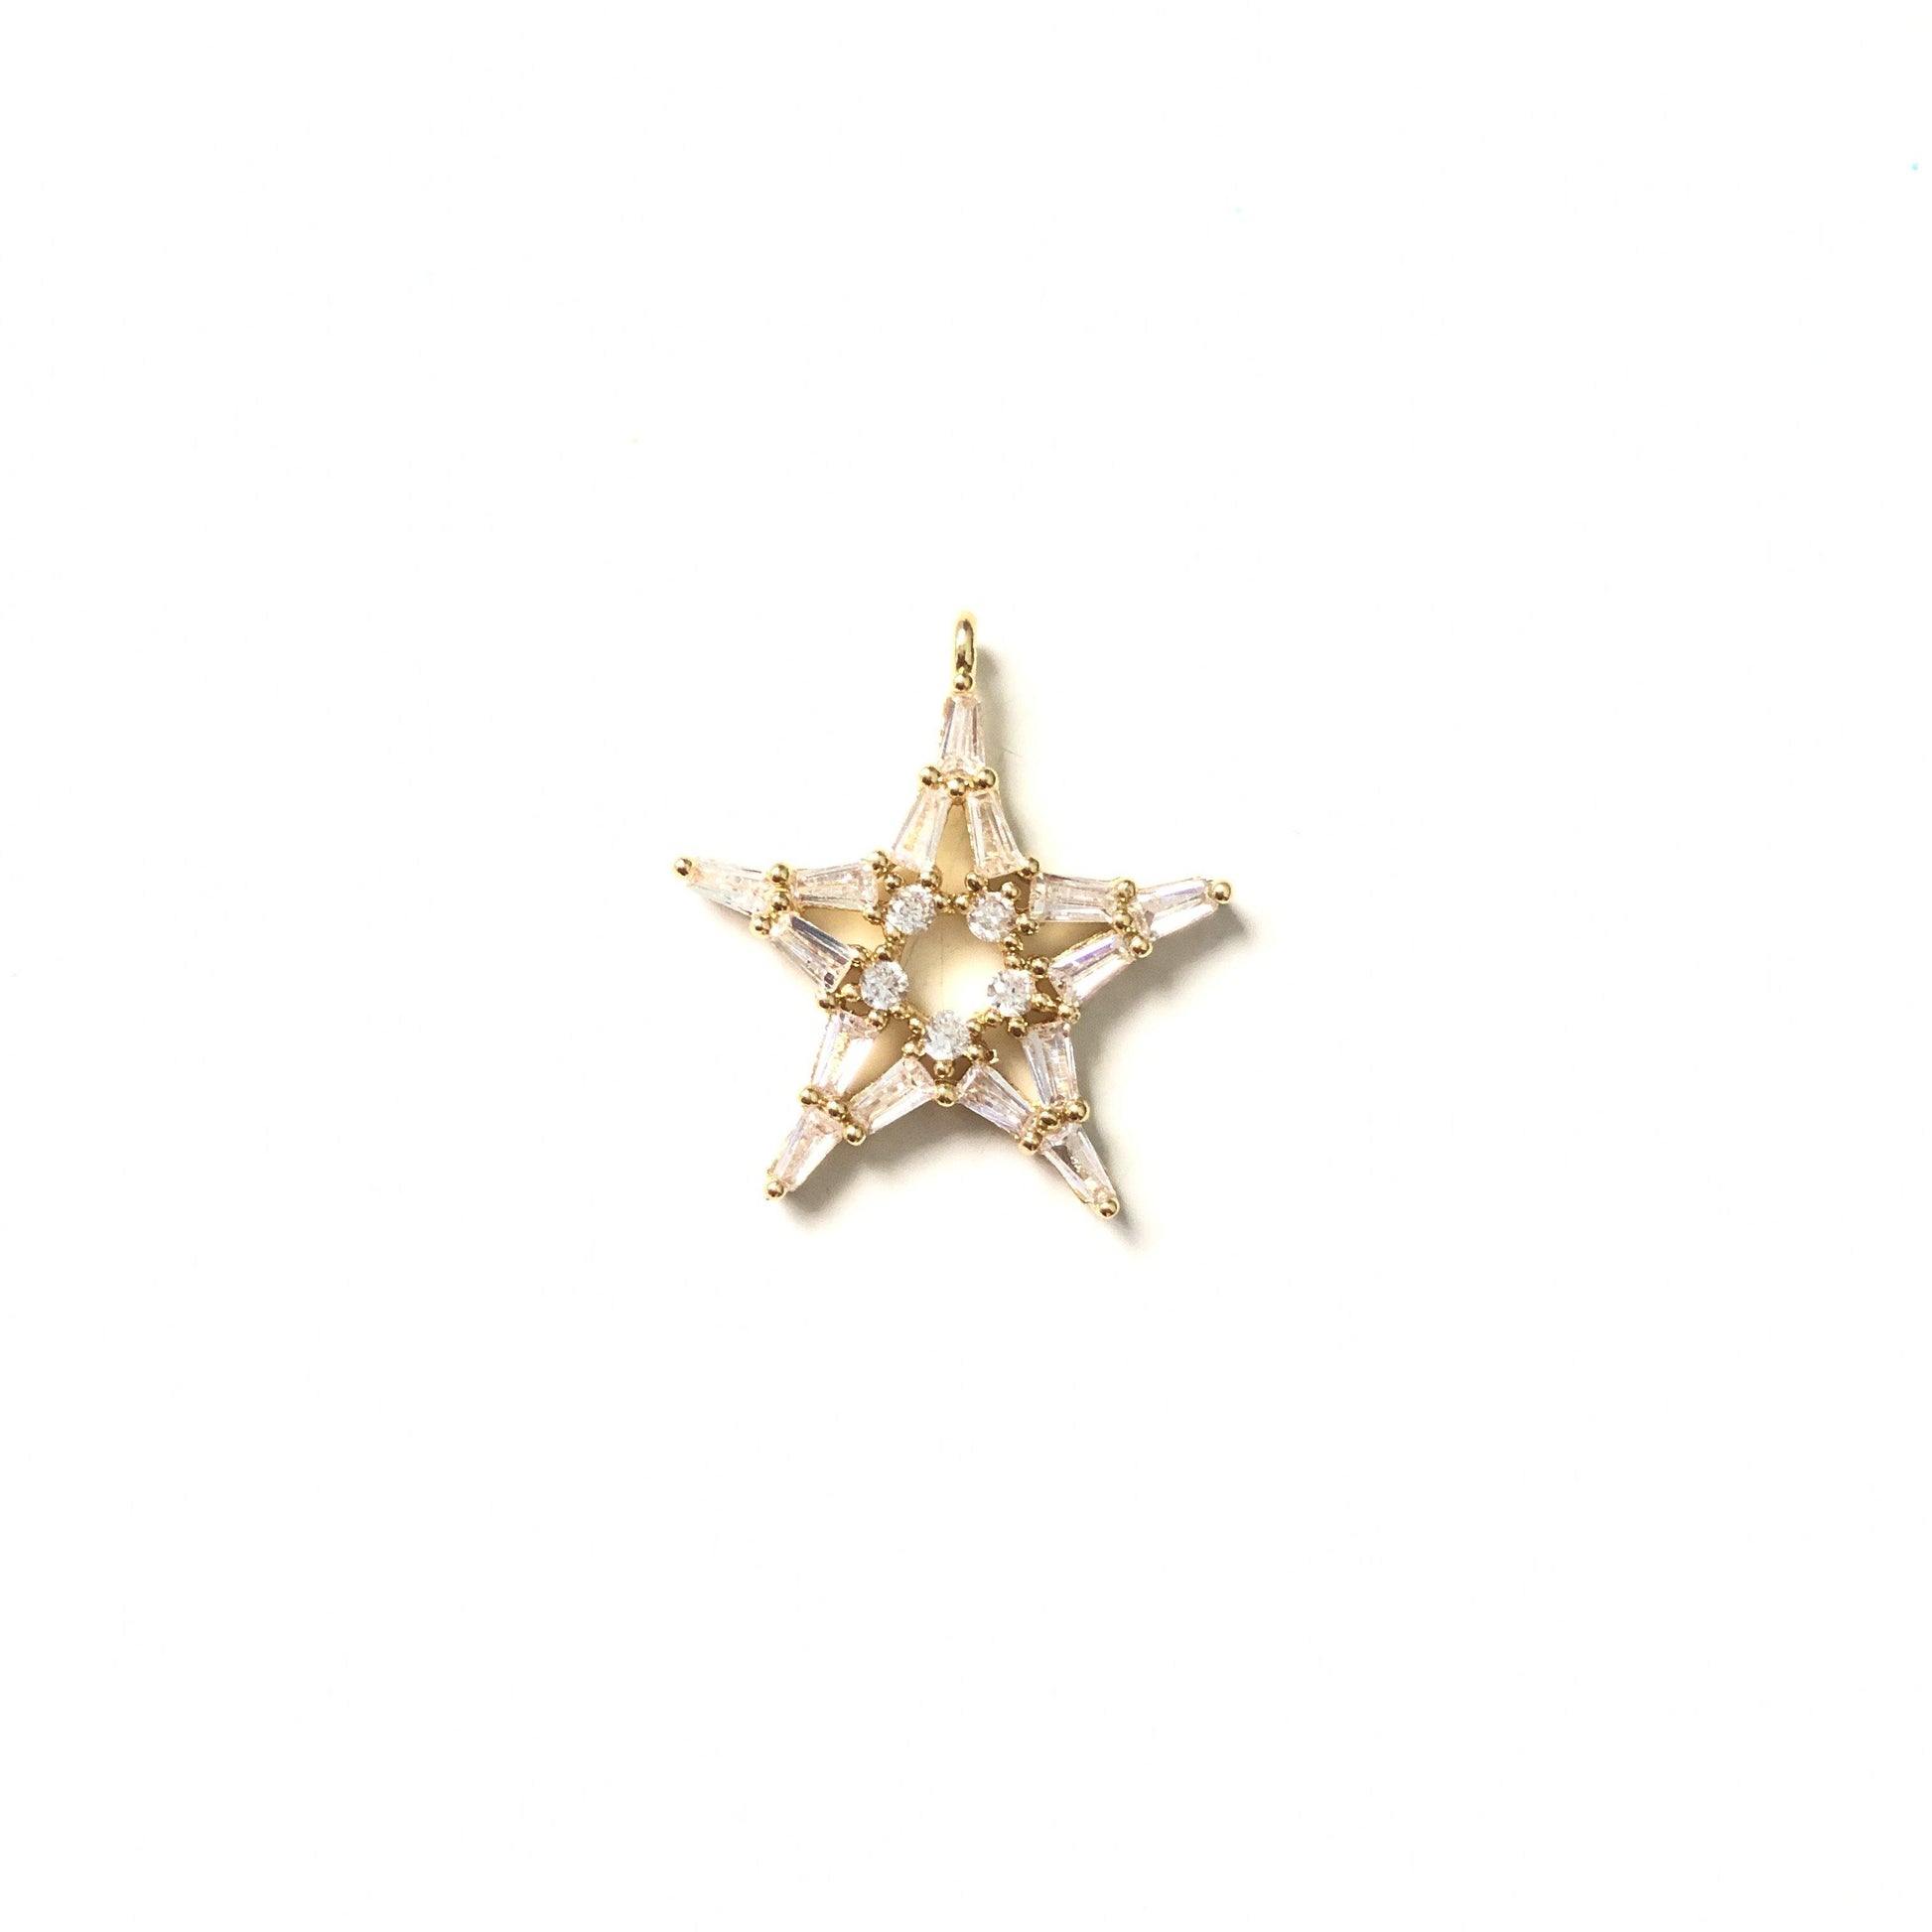 10pcs/lot 24.5*22mm Clear CZ Paved Star Charms Gold CZ Paved Charms Sun Moon Stars Charms Beads Beyond